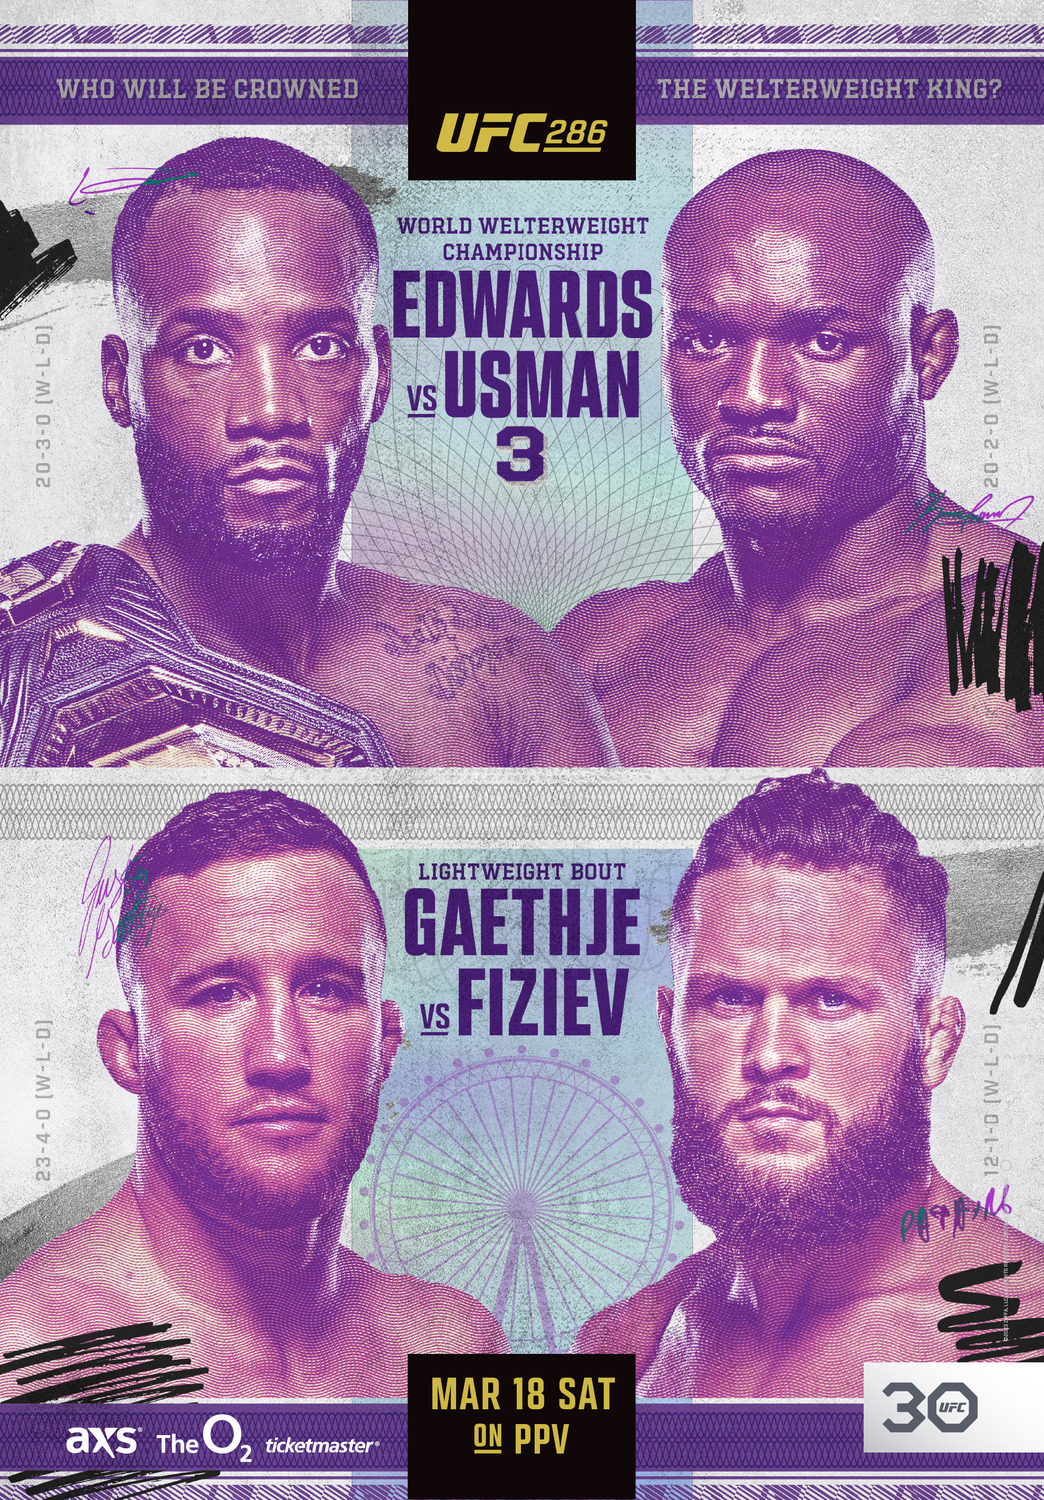 Extra Large TV Poster Image for UFC 286 